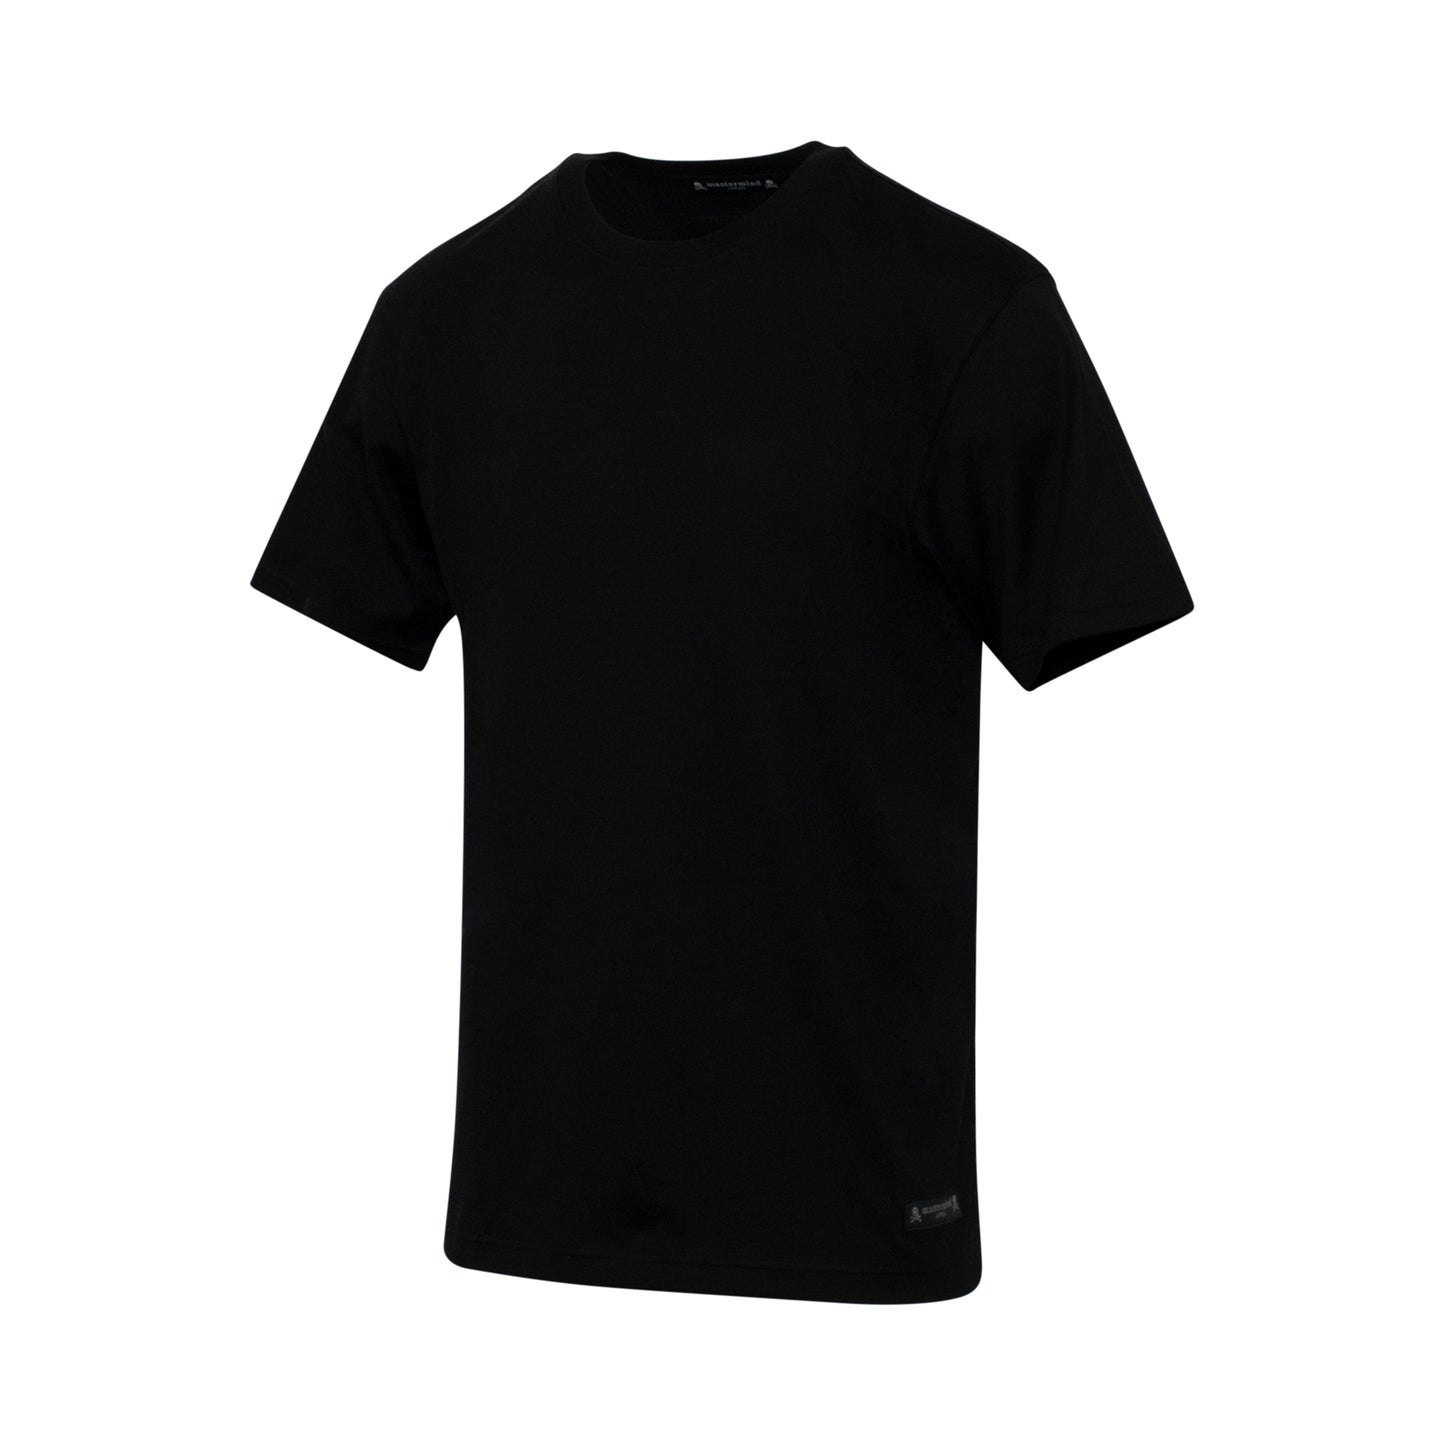 Mastermind Japan Classic T-Shirts in Black